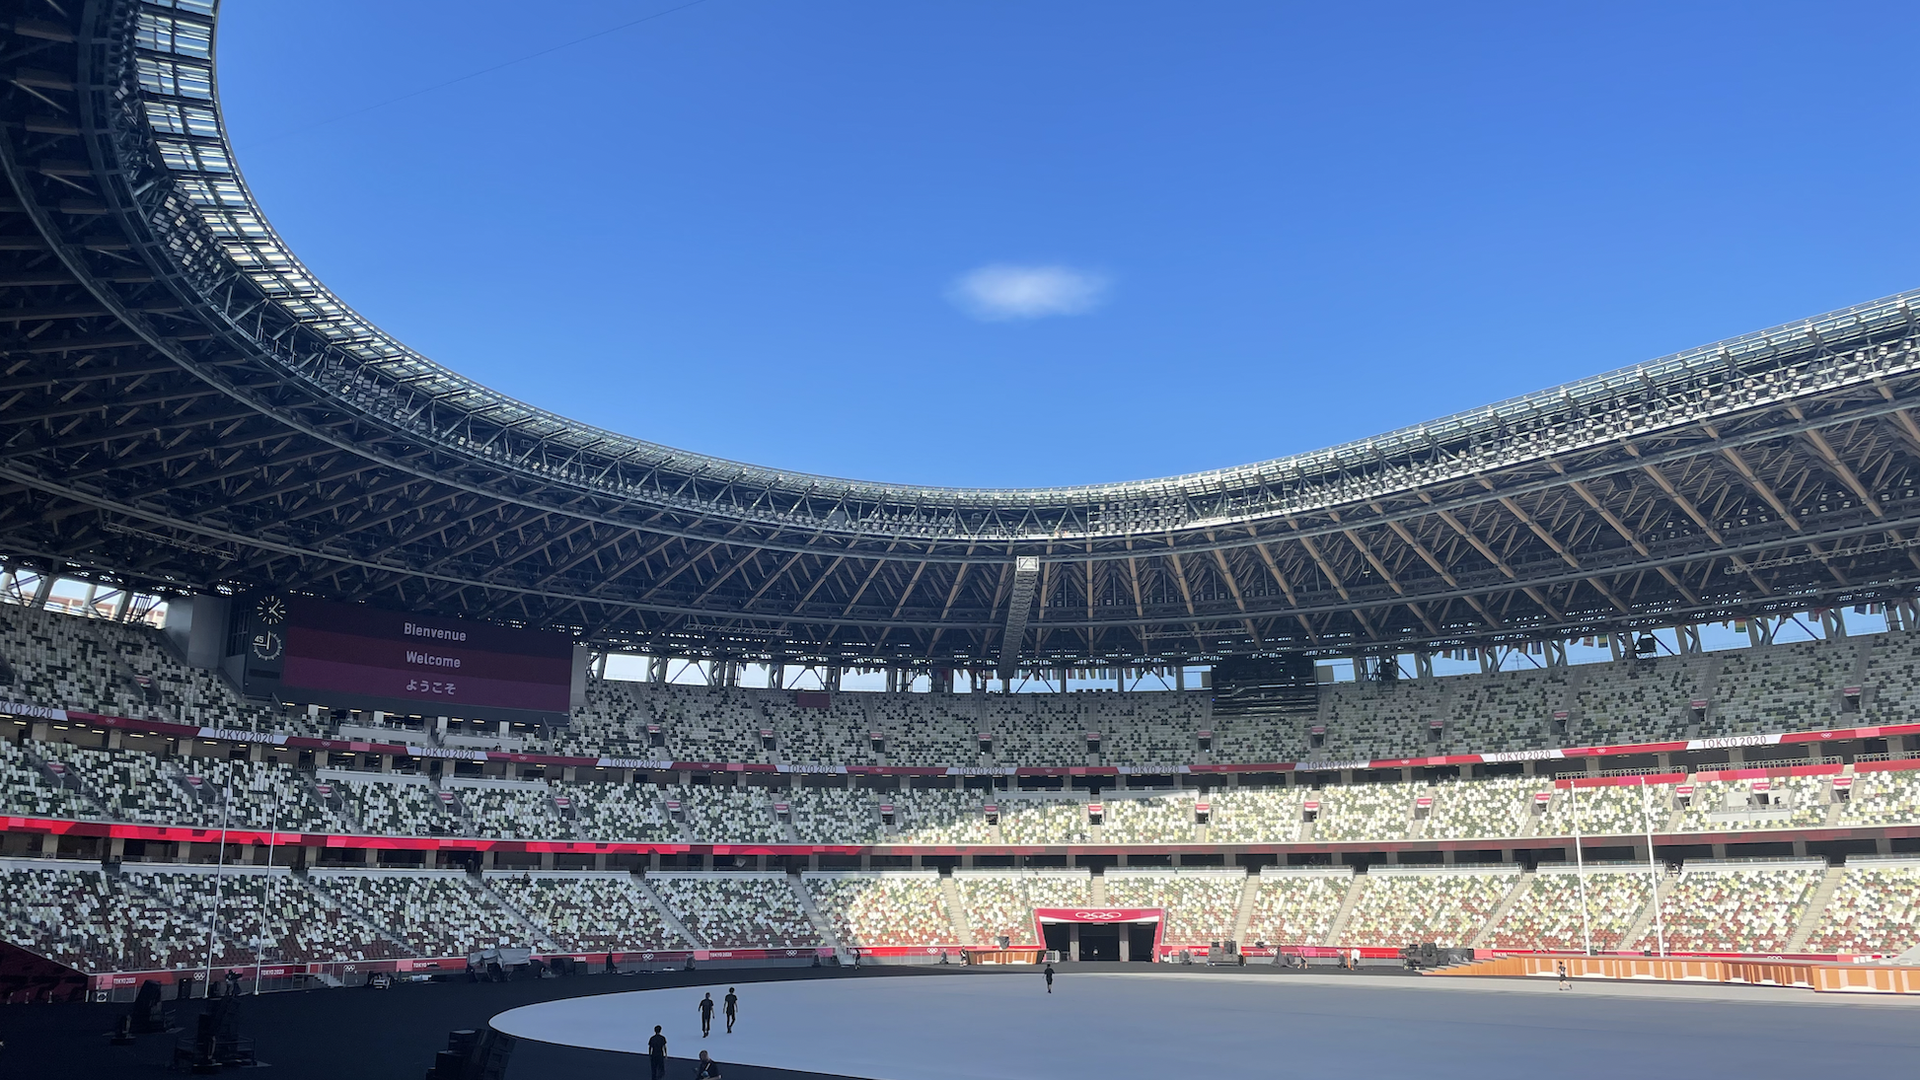 A near-empty Olympic Stadium, hours before the Opening Ceremony of the delayed 2020 Tokyo Olympics.